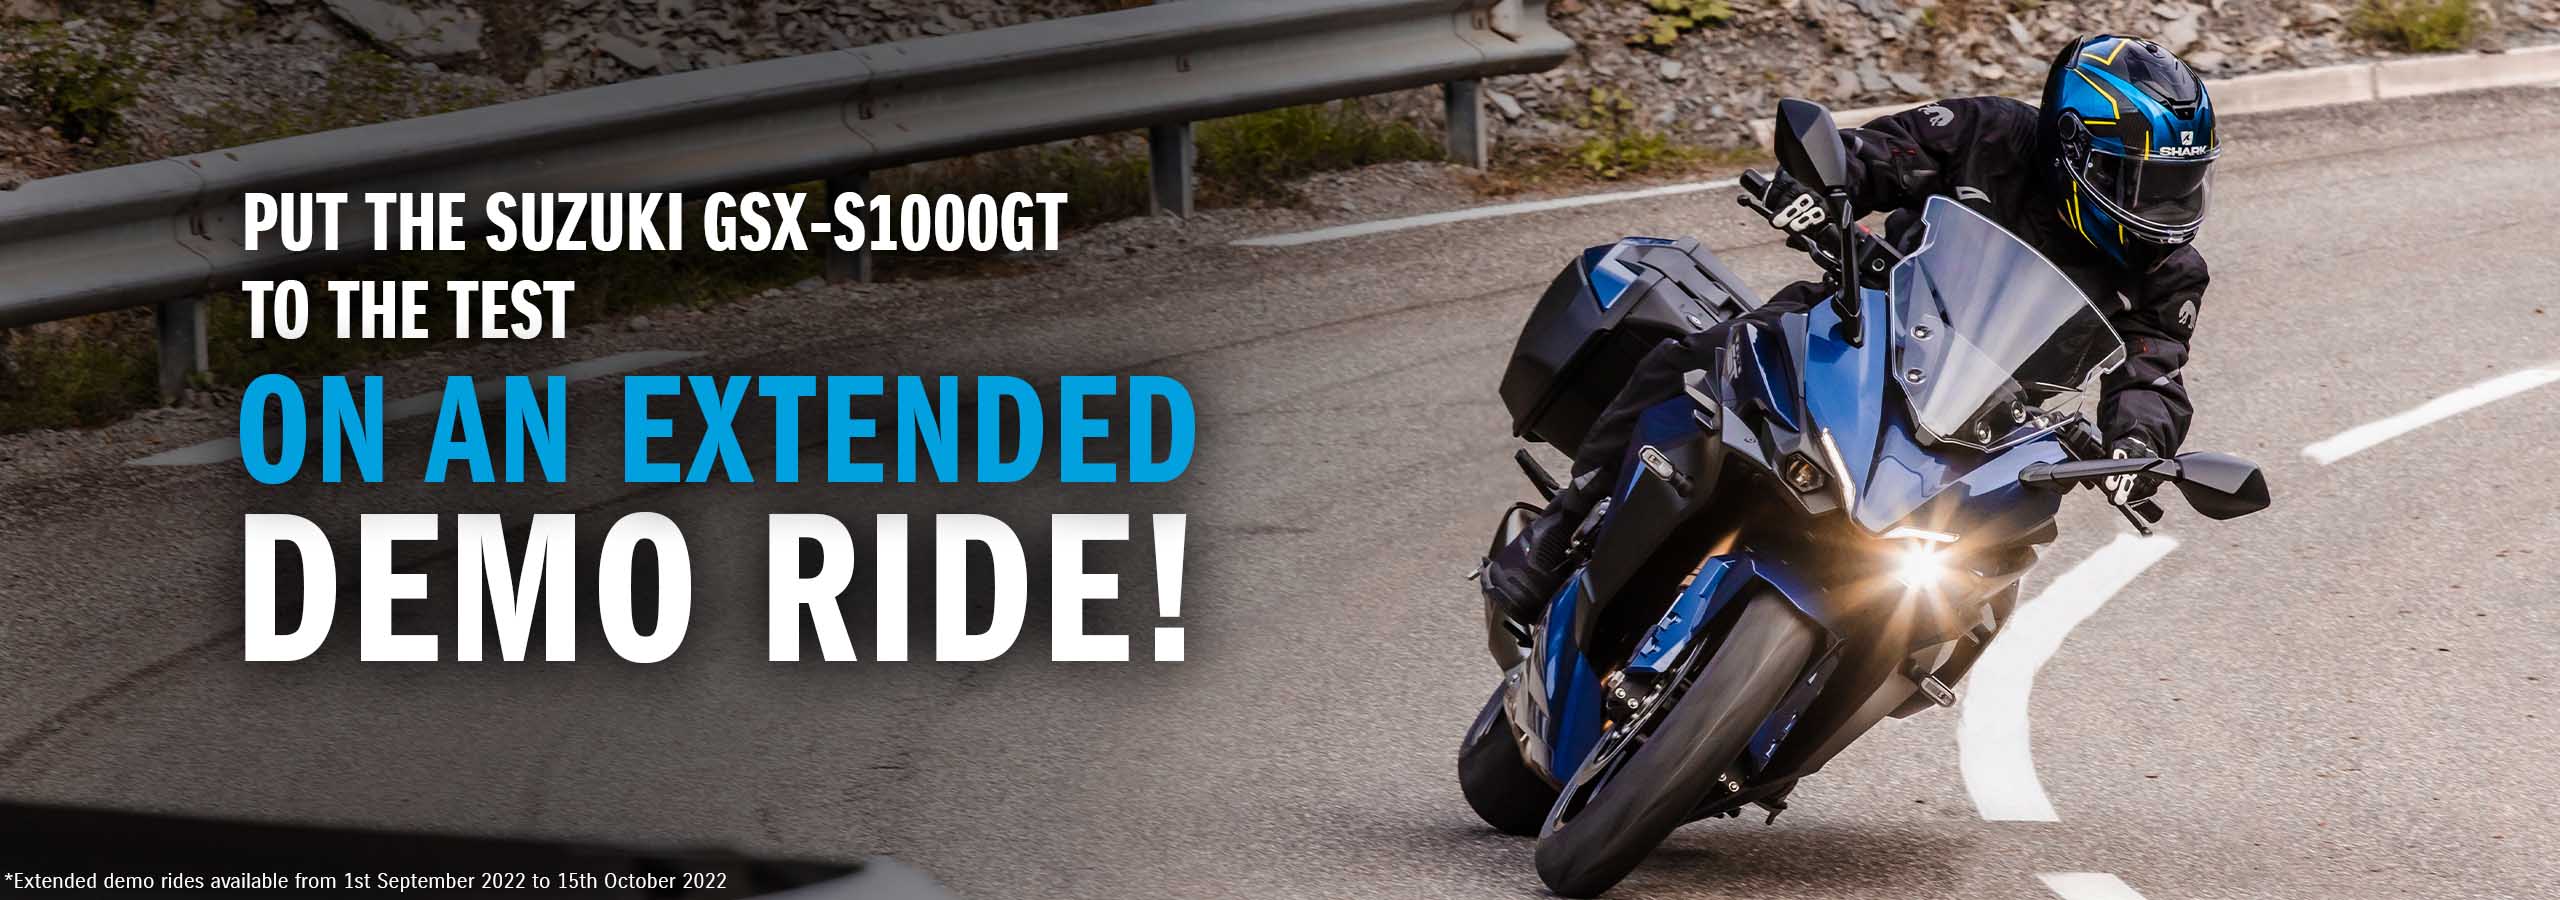 Take the Suzuki GSX-S1000GT on an extended demo ride